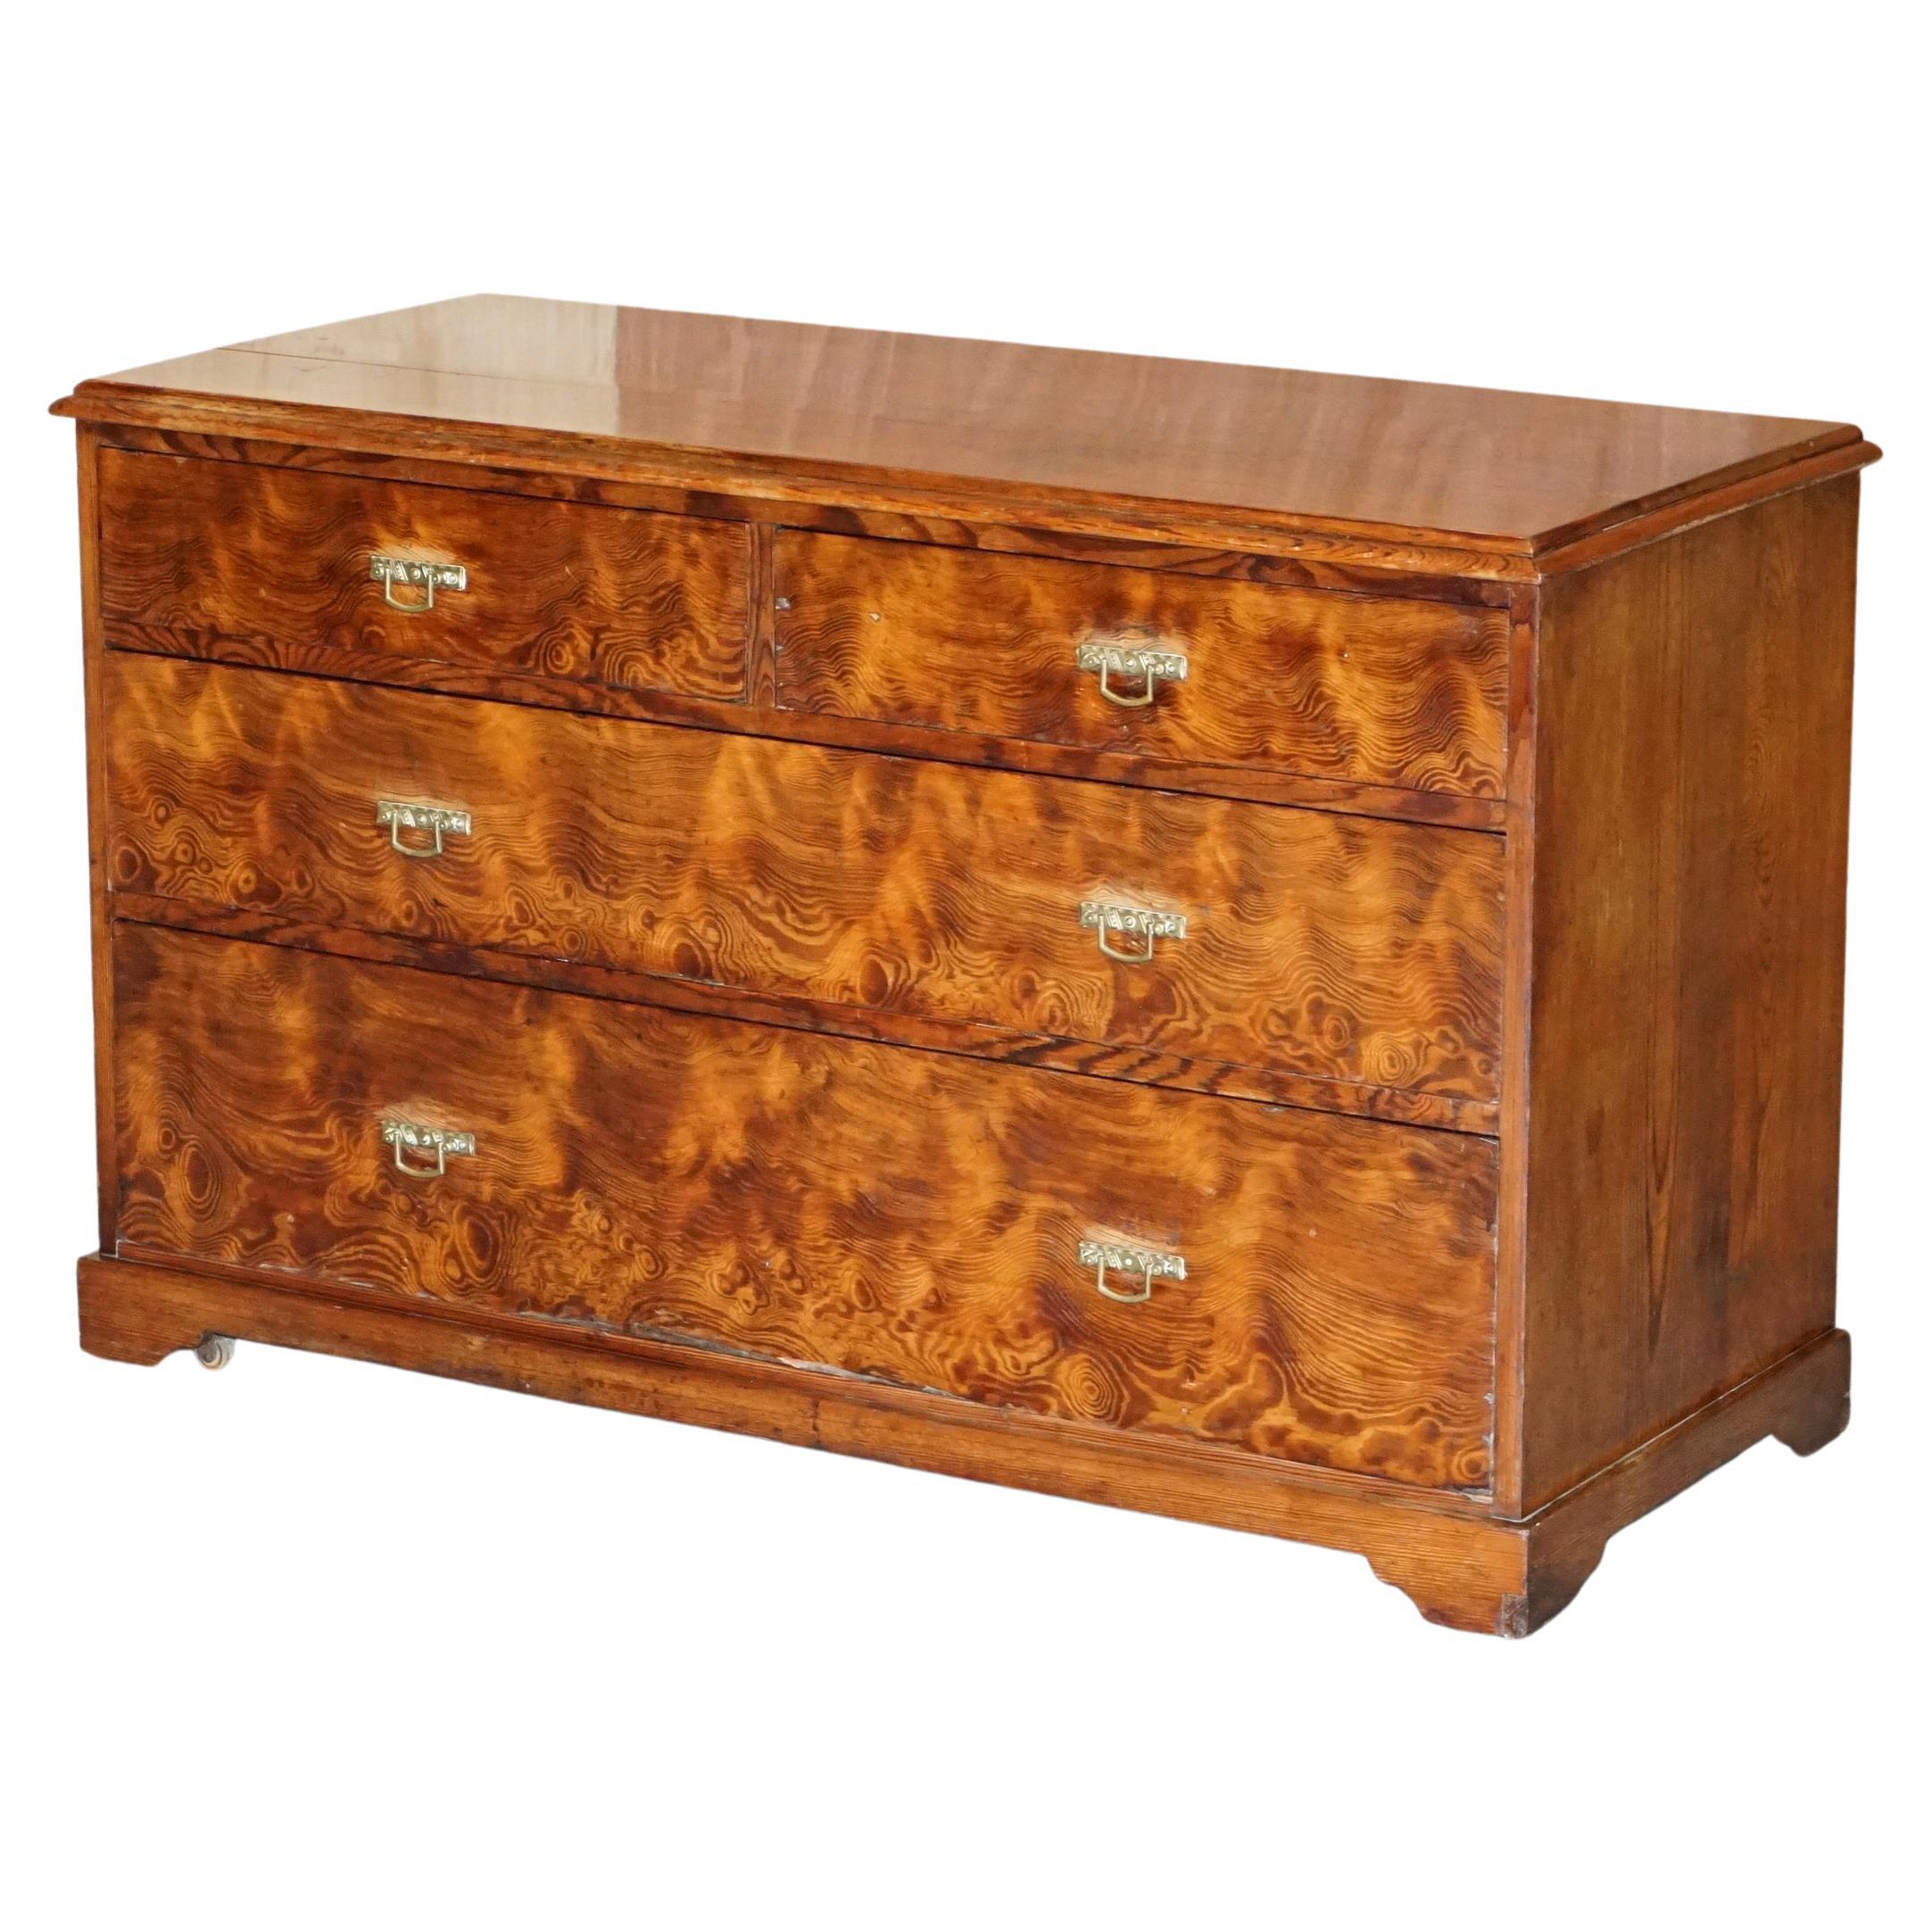 Sublime Patina circa 1880 Pitch Pine Chest of Drawers Must See Timber Grain!!!!! For Sale